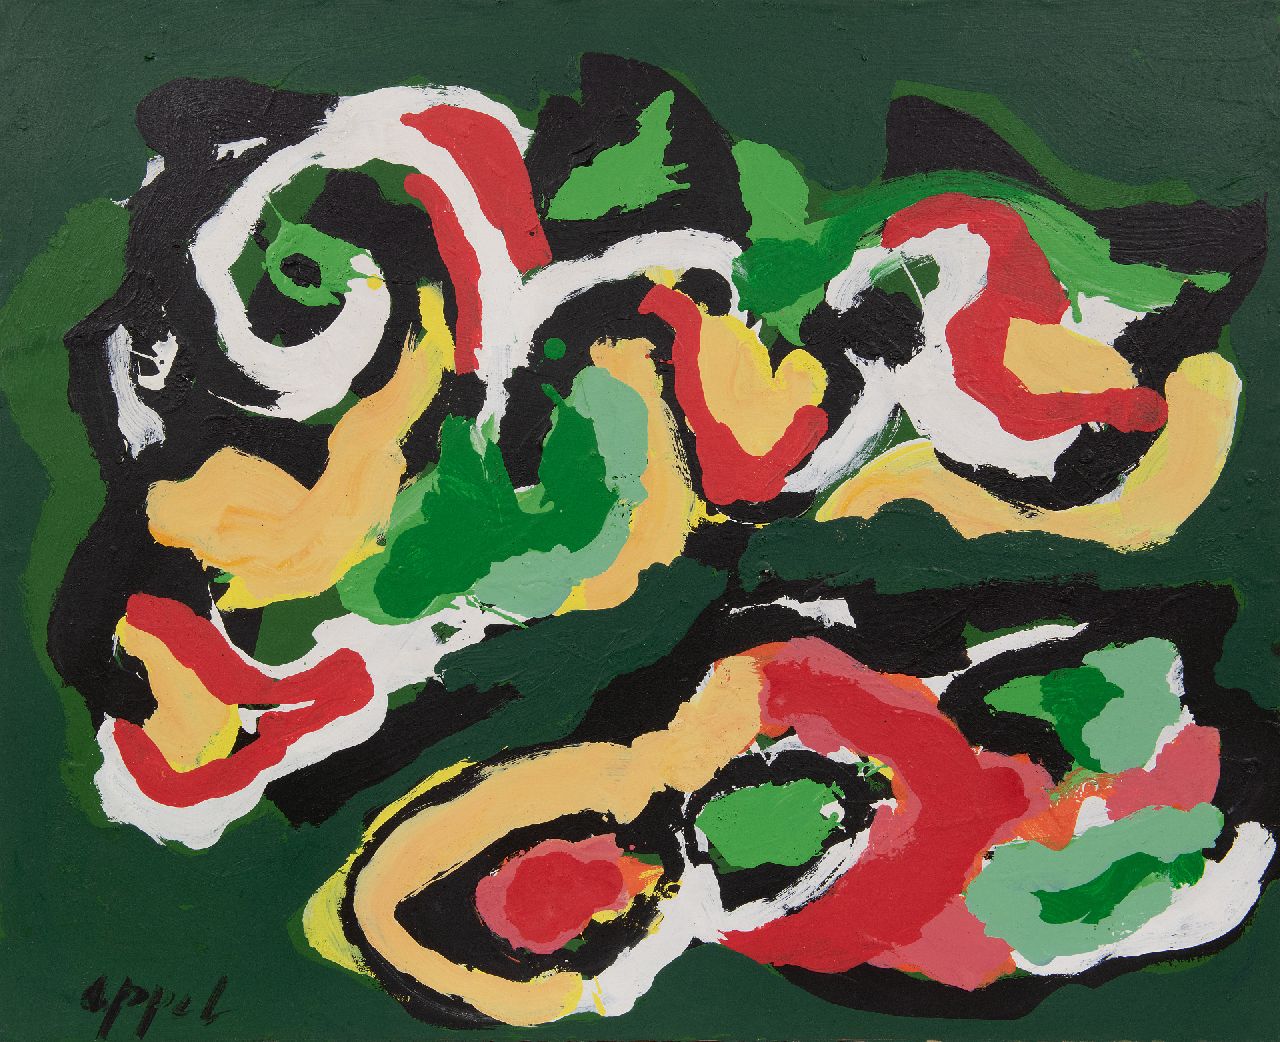 Appel C.K.  | Christiaan 'Karel' Appel | Paintings offered for sale | Untitled, acrylic on paper on canvas 68.1 x 84.1 cm, signed l.l.